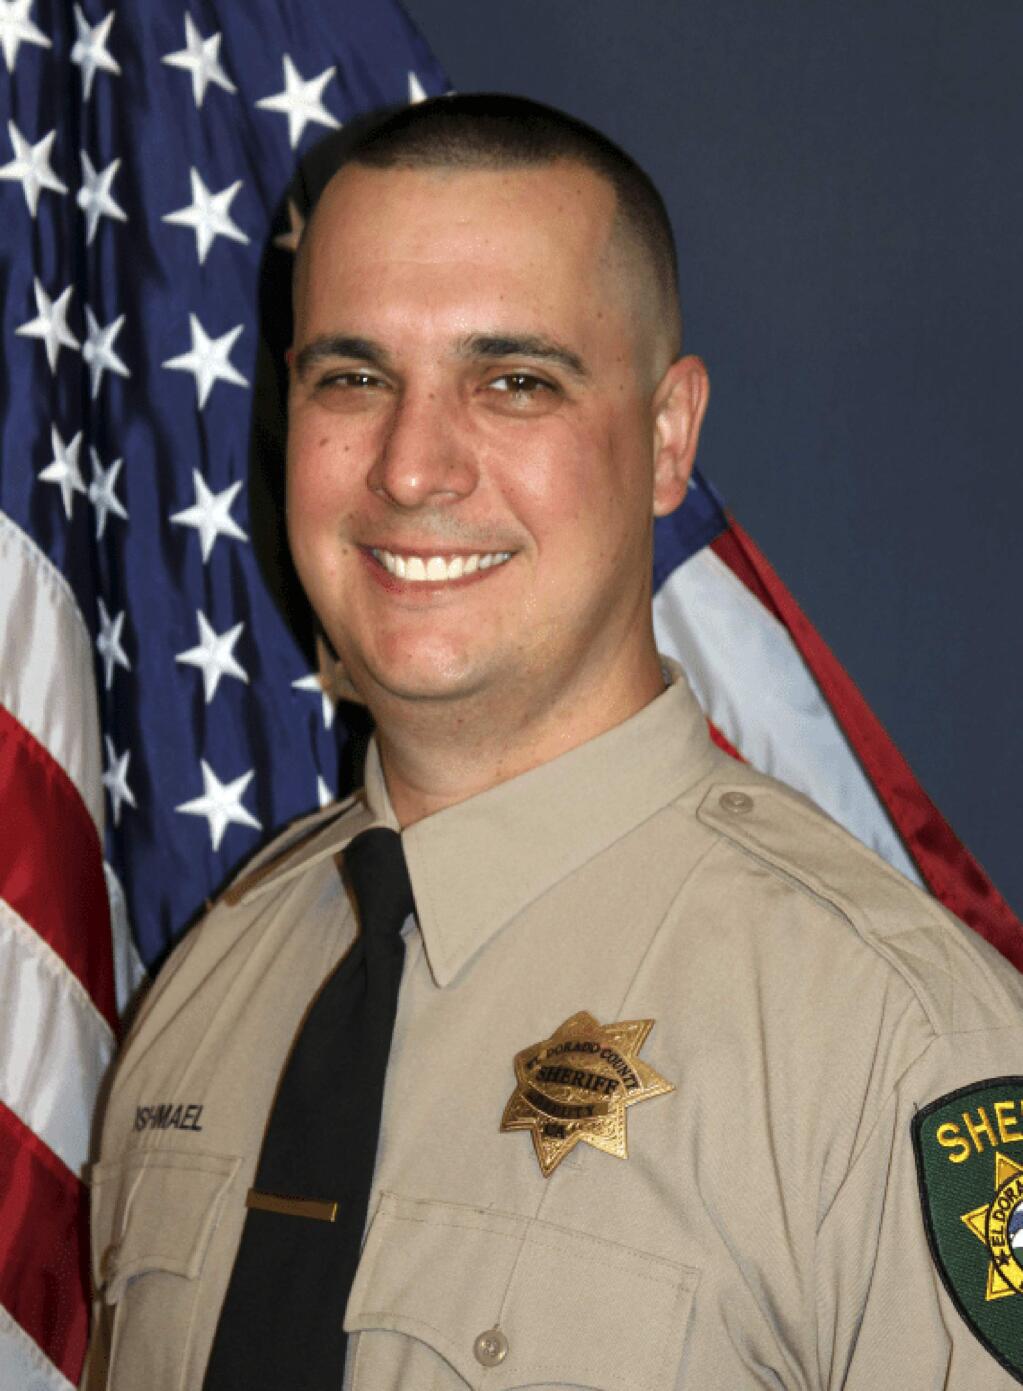 FILE - This undated file photo provided by the El Dorado County Sheriff's Office shows Deputy Brian Ishmael. Thousands of friends, colleagues and family remembered a Northern California sheriff's deputy killed in October while responding to a call about a theft from a marijuana garden as a devoted father and a committed deputy. The Sacramento Bee reports more than 3,000 people attended a service Tuesday, Nov. 5, 2019, in honor of El Dorado County Deputy Brian Ishmael at a church in Roseville. (El Dorado County Sheriff's Office via AP, File)